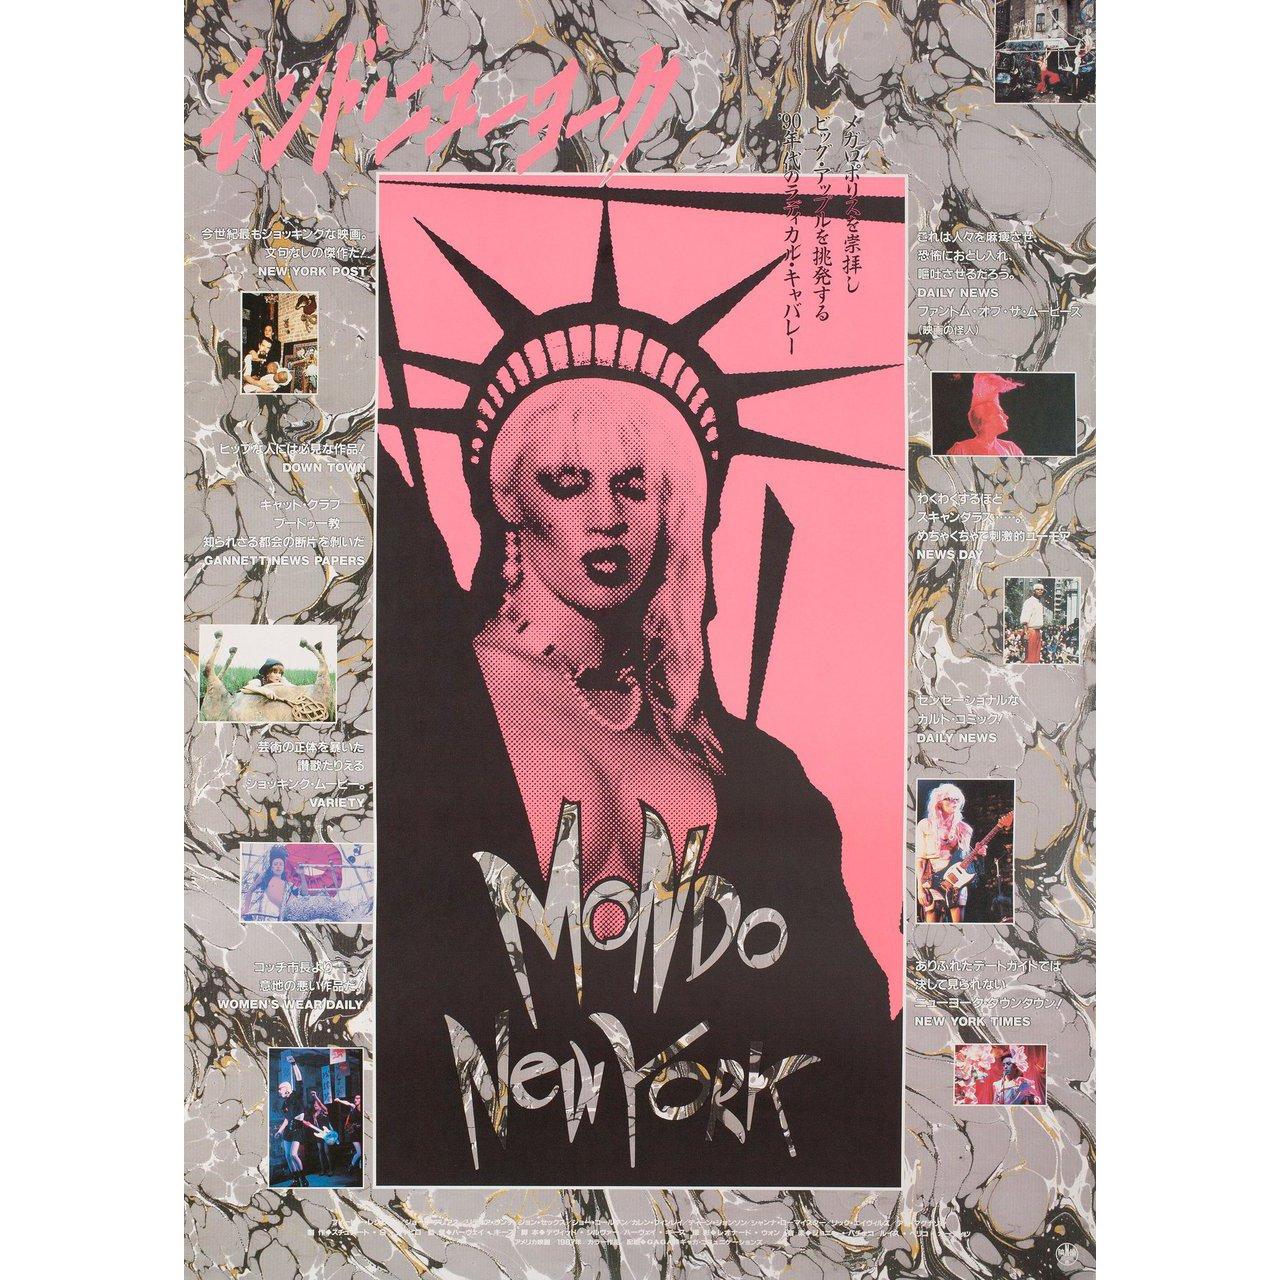 Original 1988 Japanese B2 poster for the documentary film Mondo New York directed by Harvey Keith with Joseph Arias / Rick Aviles / Charlie Barnett / Joe Coleman. Very good-fine condition, rolled. Please note: the size is stated in inches and the